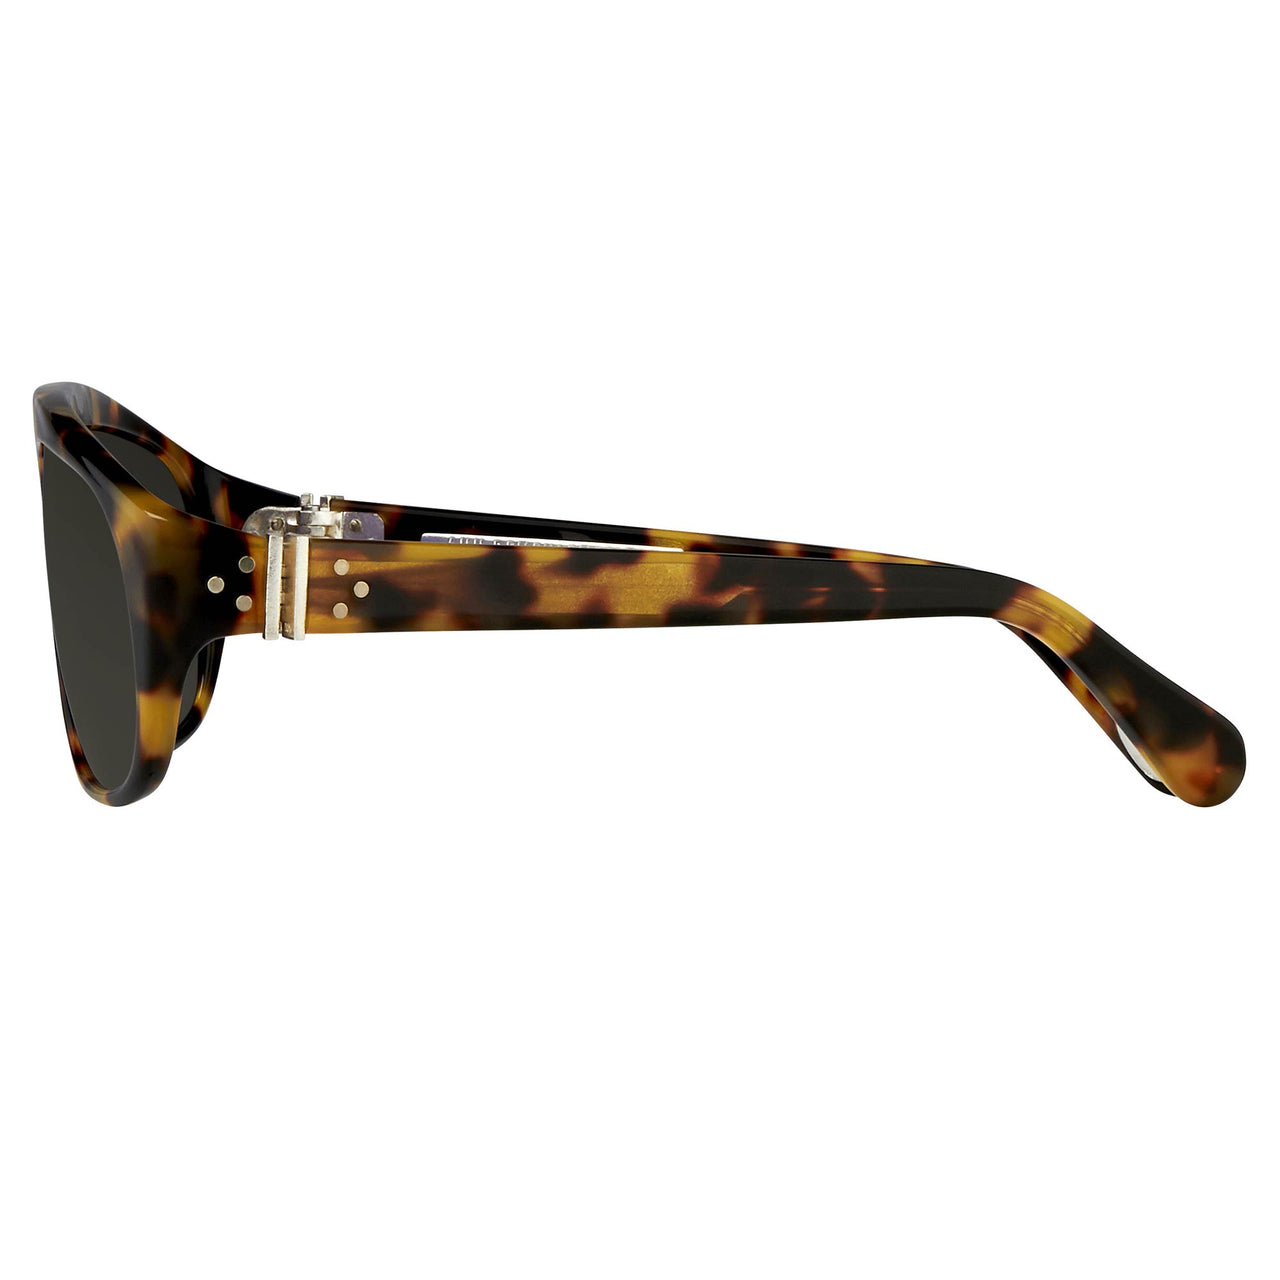 Ann Demeulemeester Sunglasses Tortoise Shell 925 Silver with Grey Lenses CAT3 AD1C2SUN - Watches & Crystals